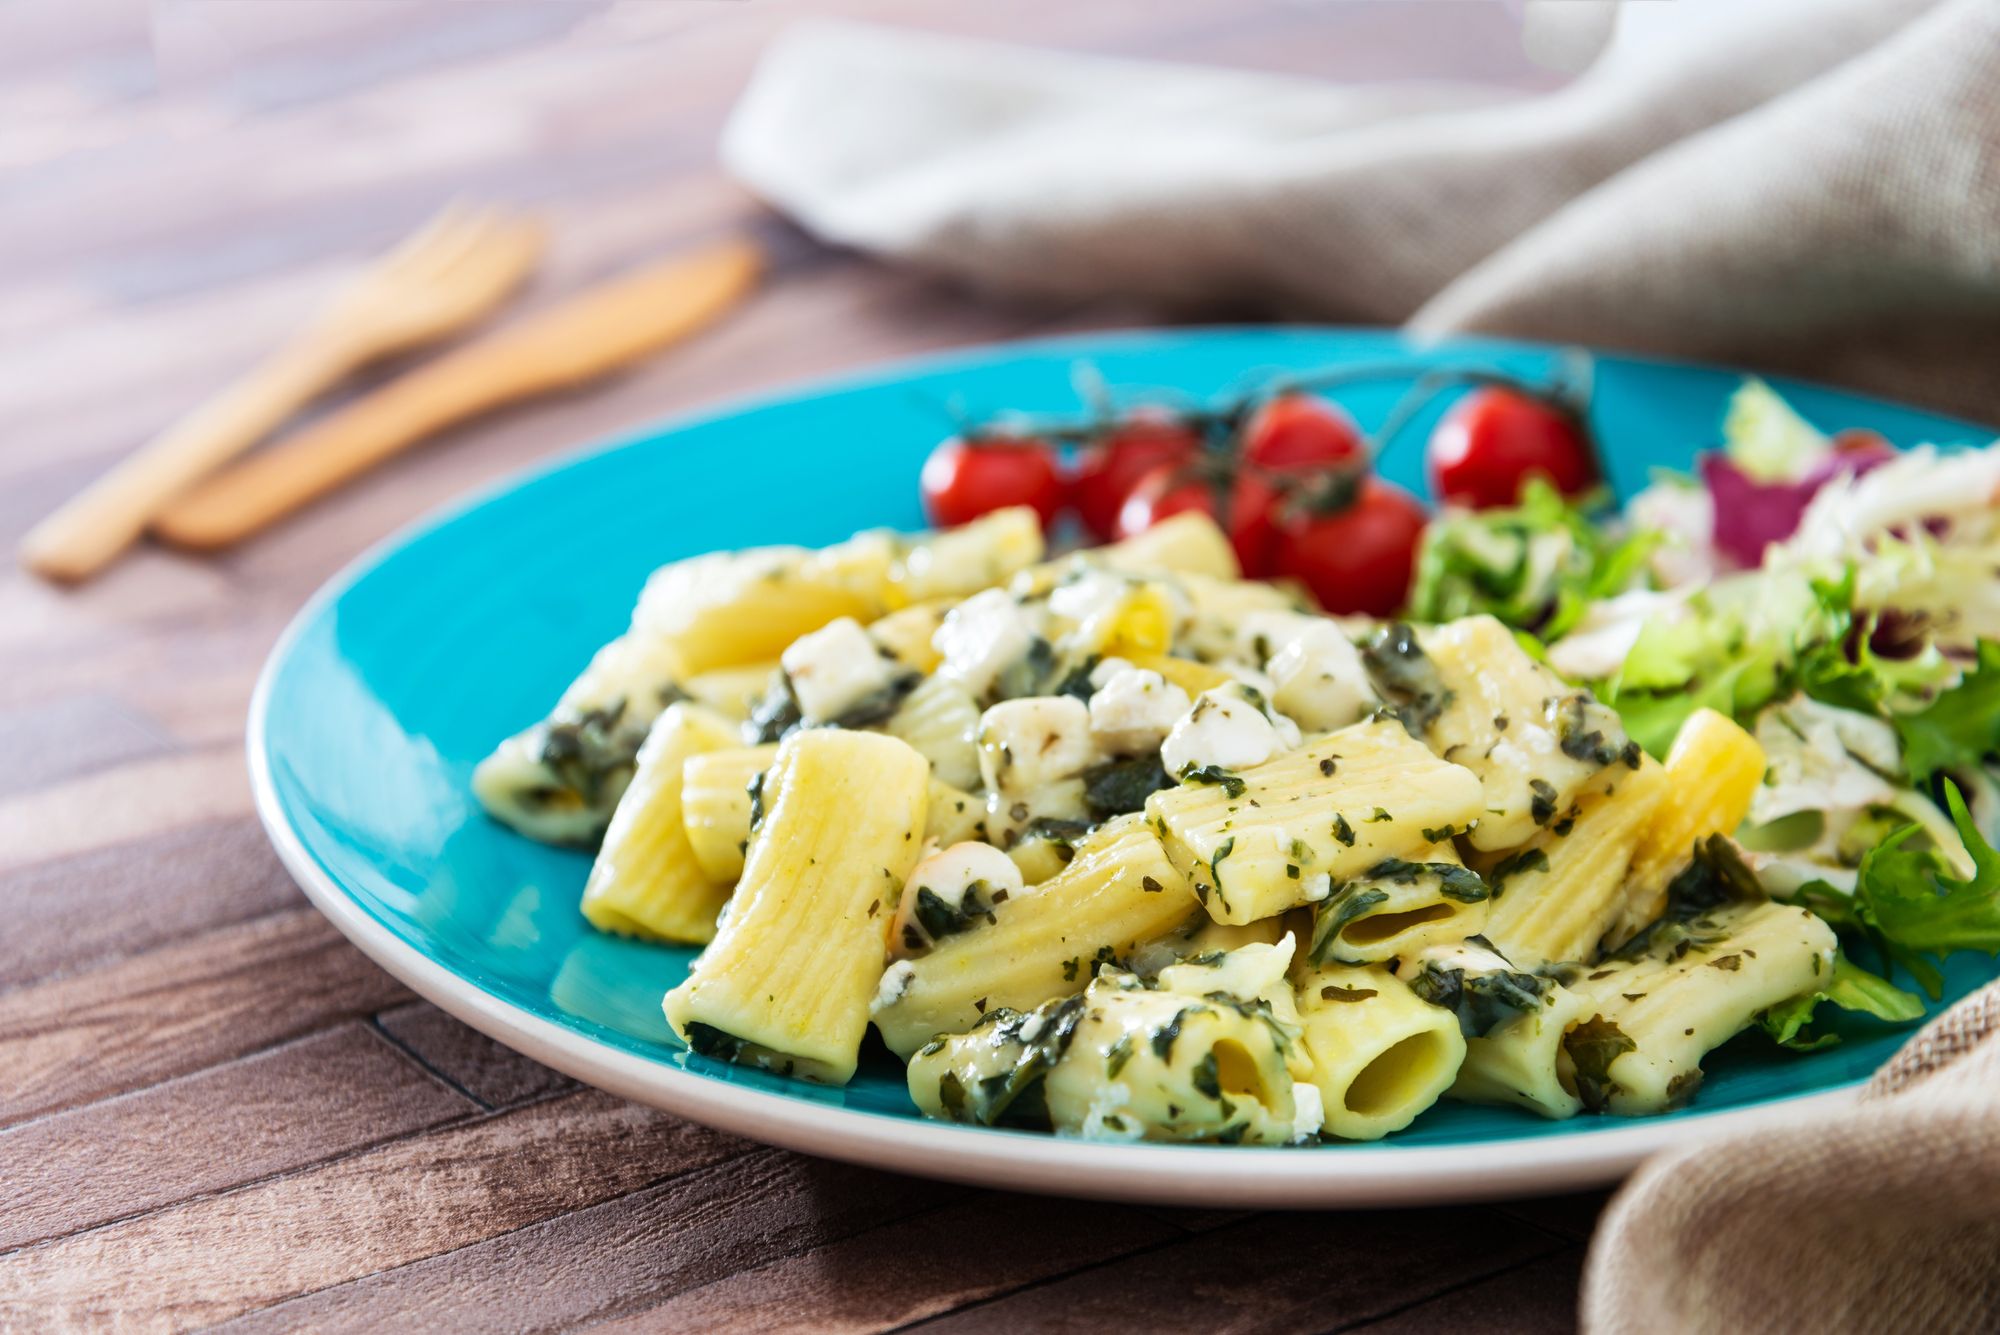 Spinach and Goat’s Cheese Pasta Salad